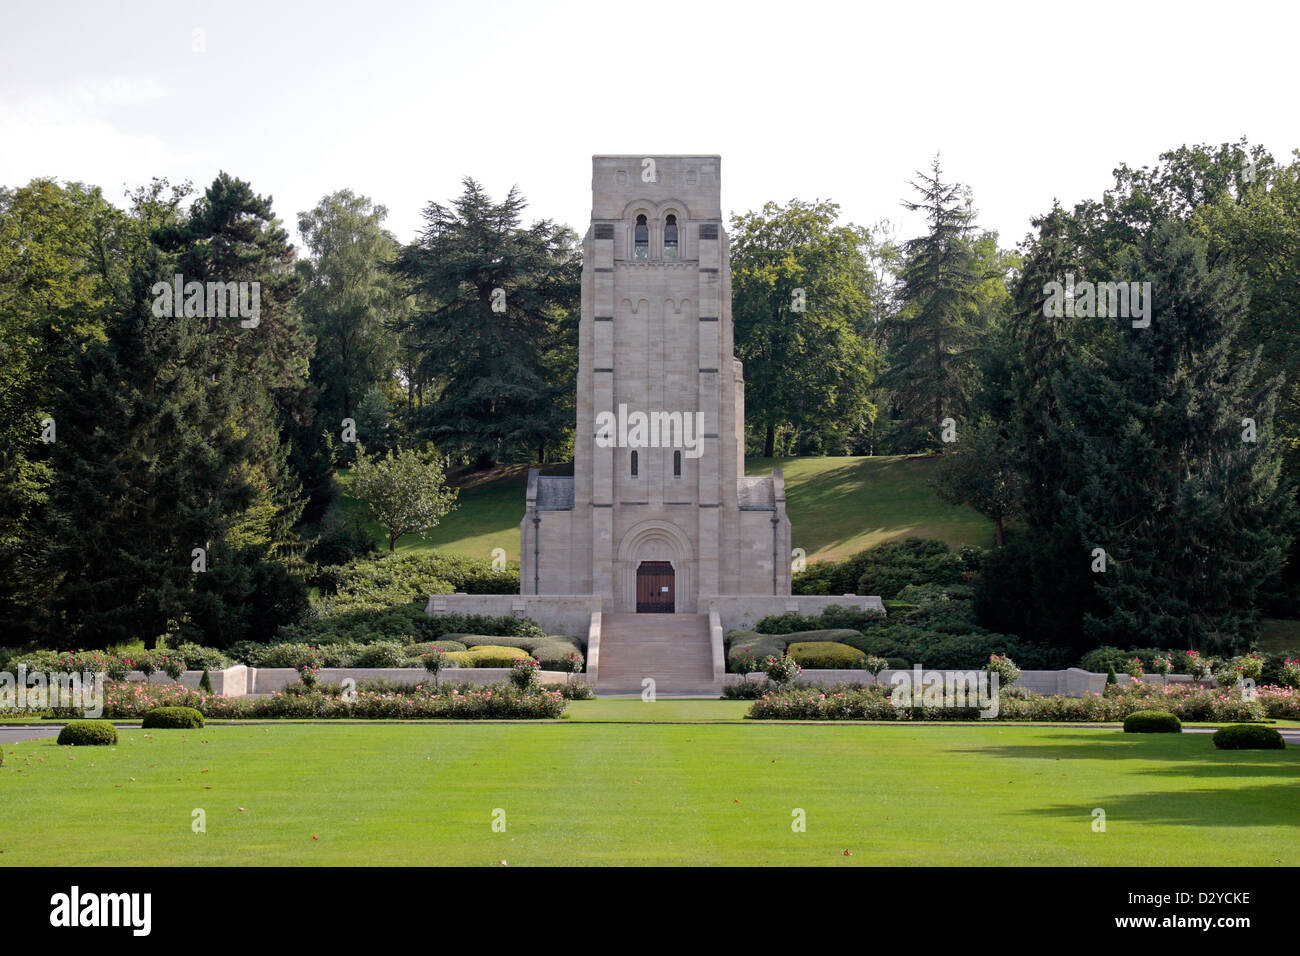 Memorial Chapel in the Aisne-Marne American Cemetery and Memorial, Belleau, near Chateau-Thierry, France. Stock Photo